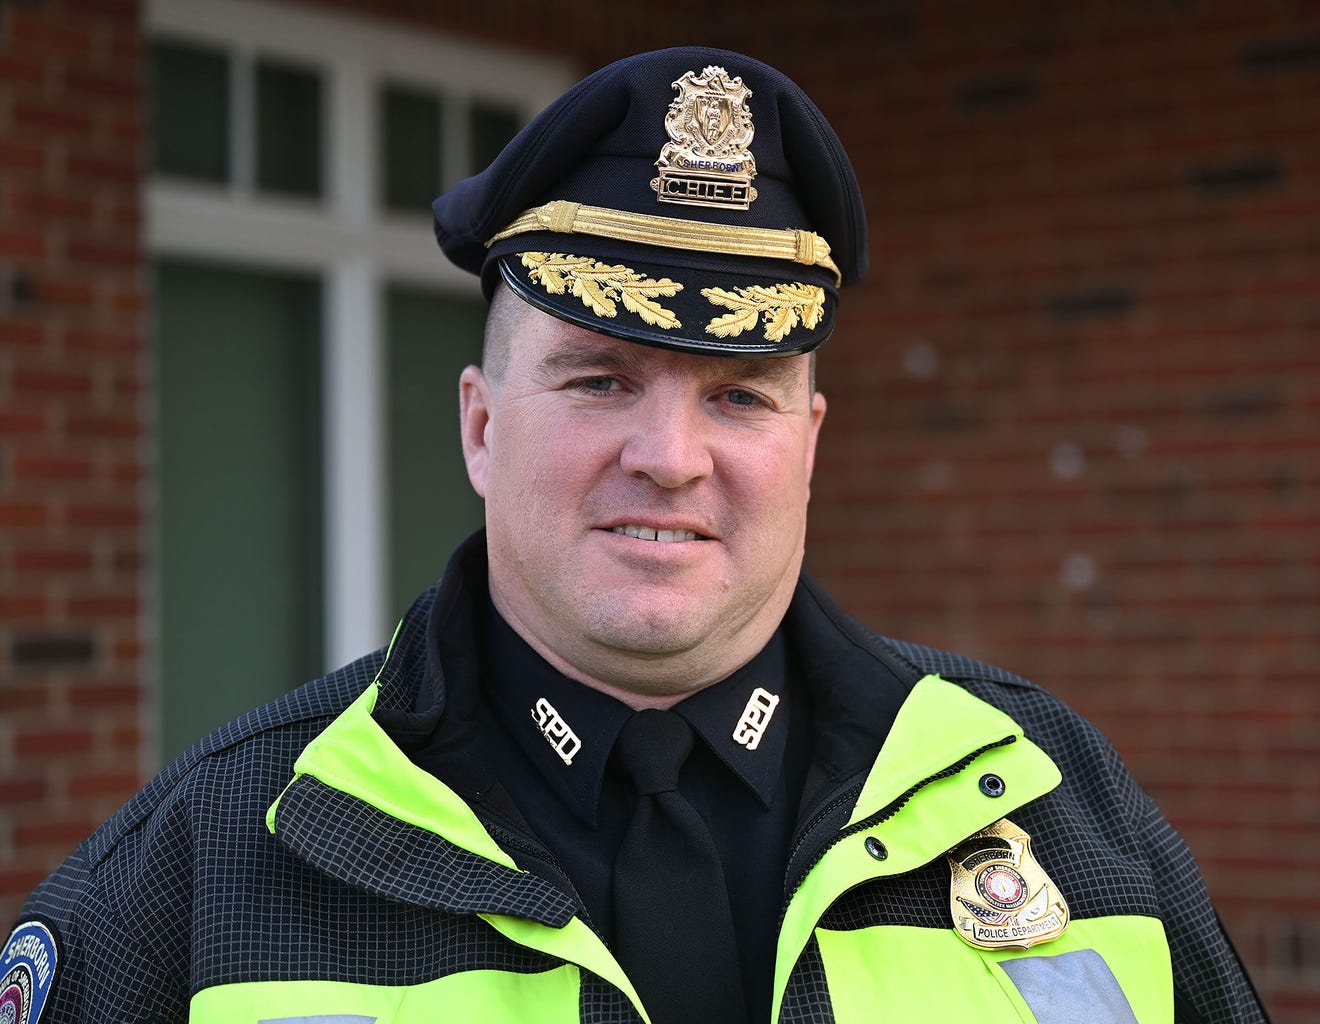 Sherborn police chief Tom Galvin followed in his family's footsteps